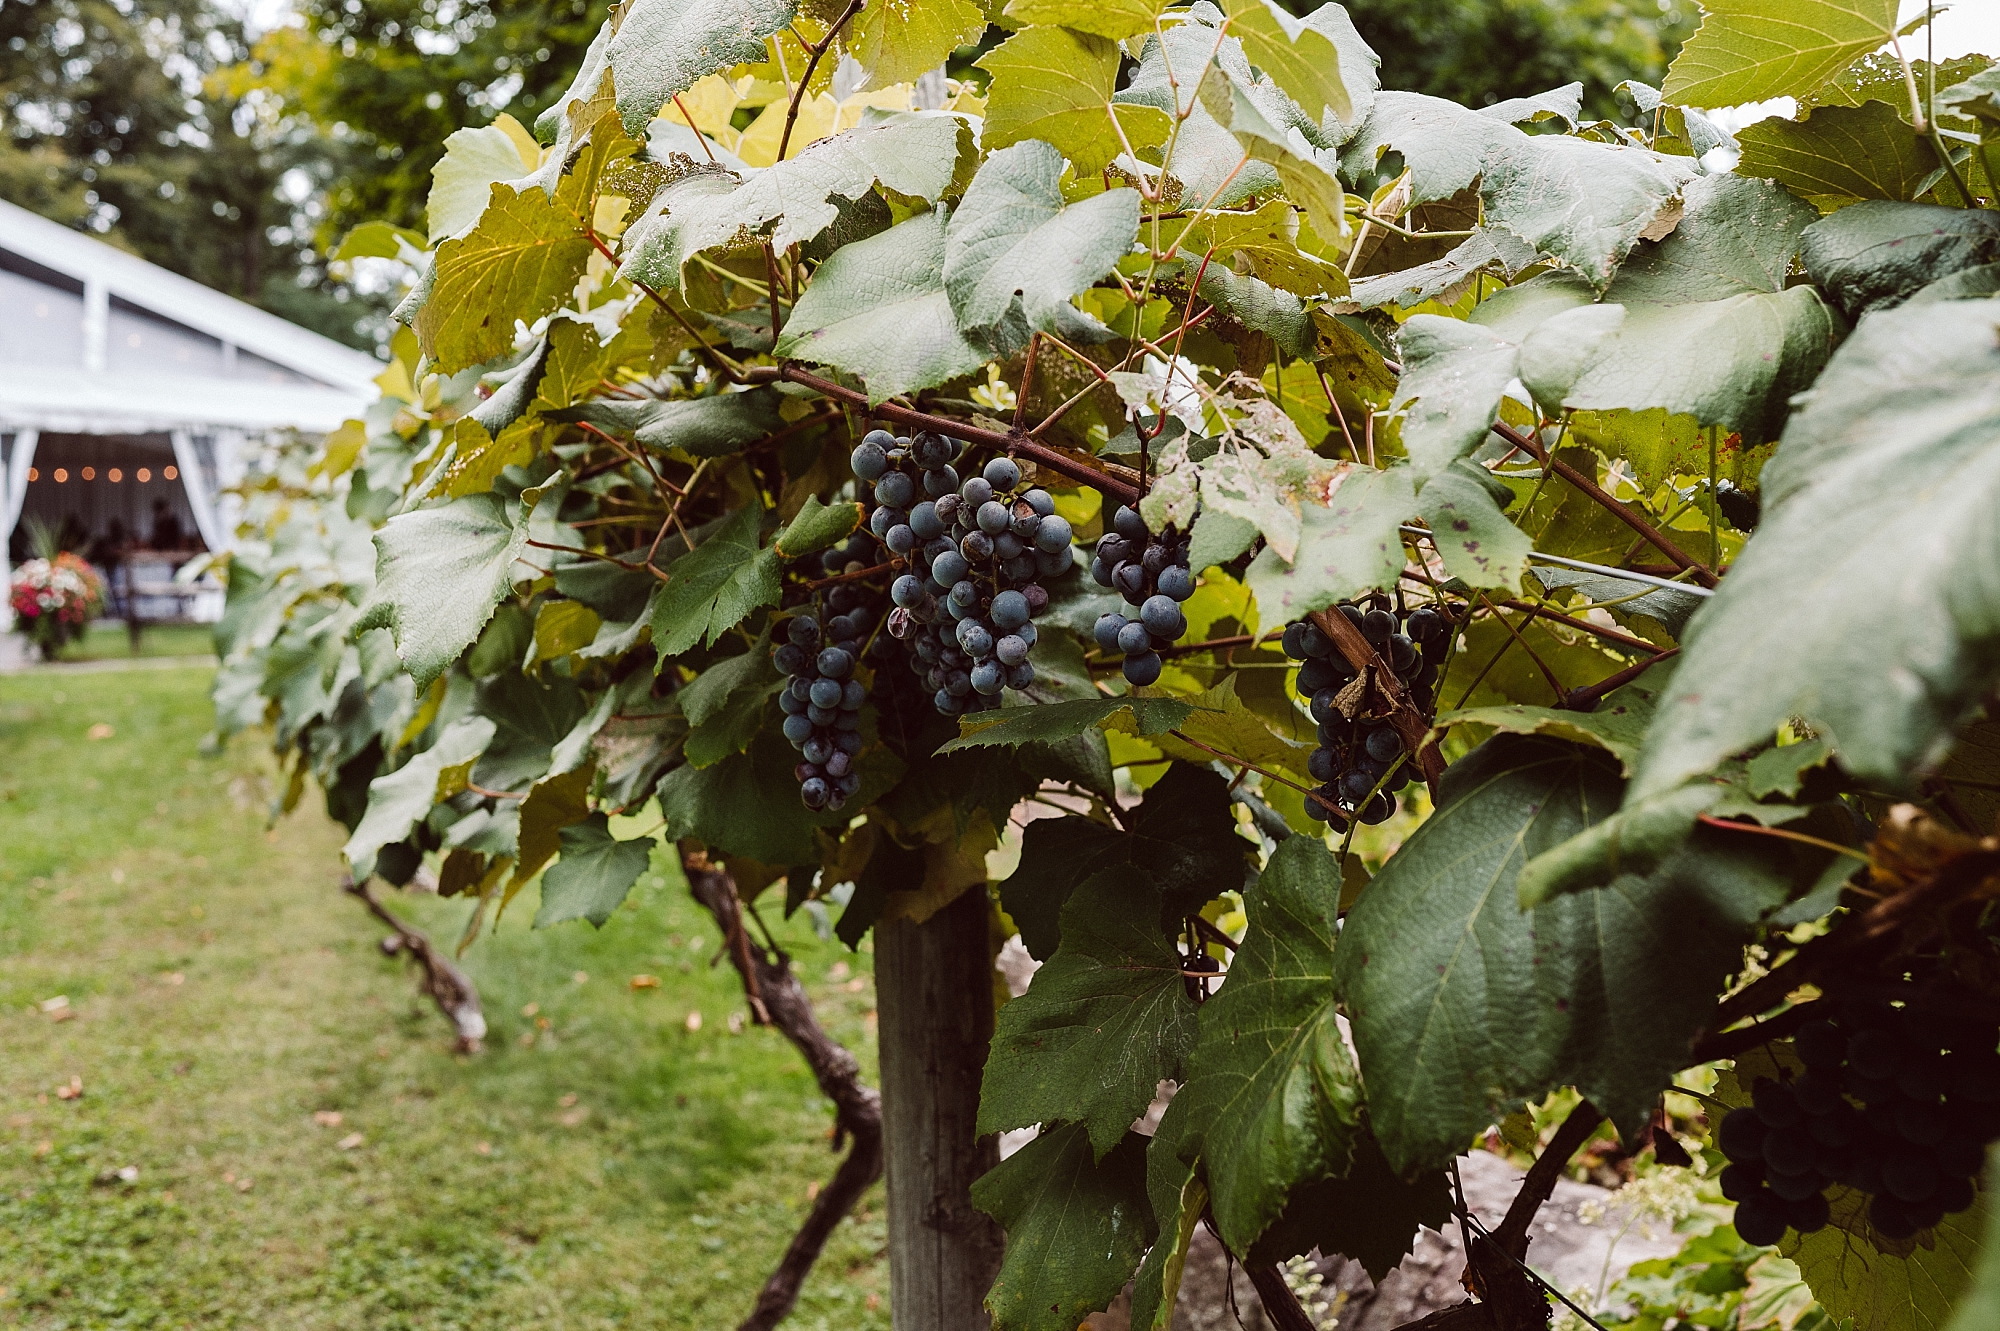 grapes ripe on the vine at crossing vineyards and winery in Pennsylvania